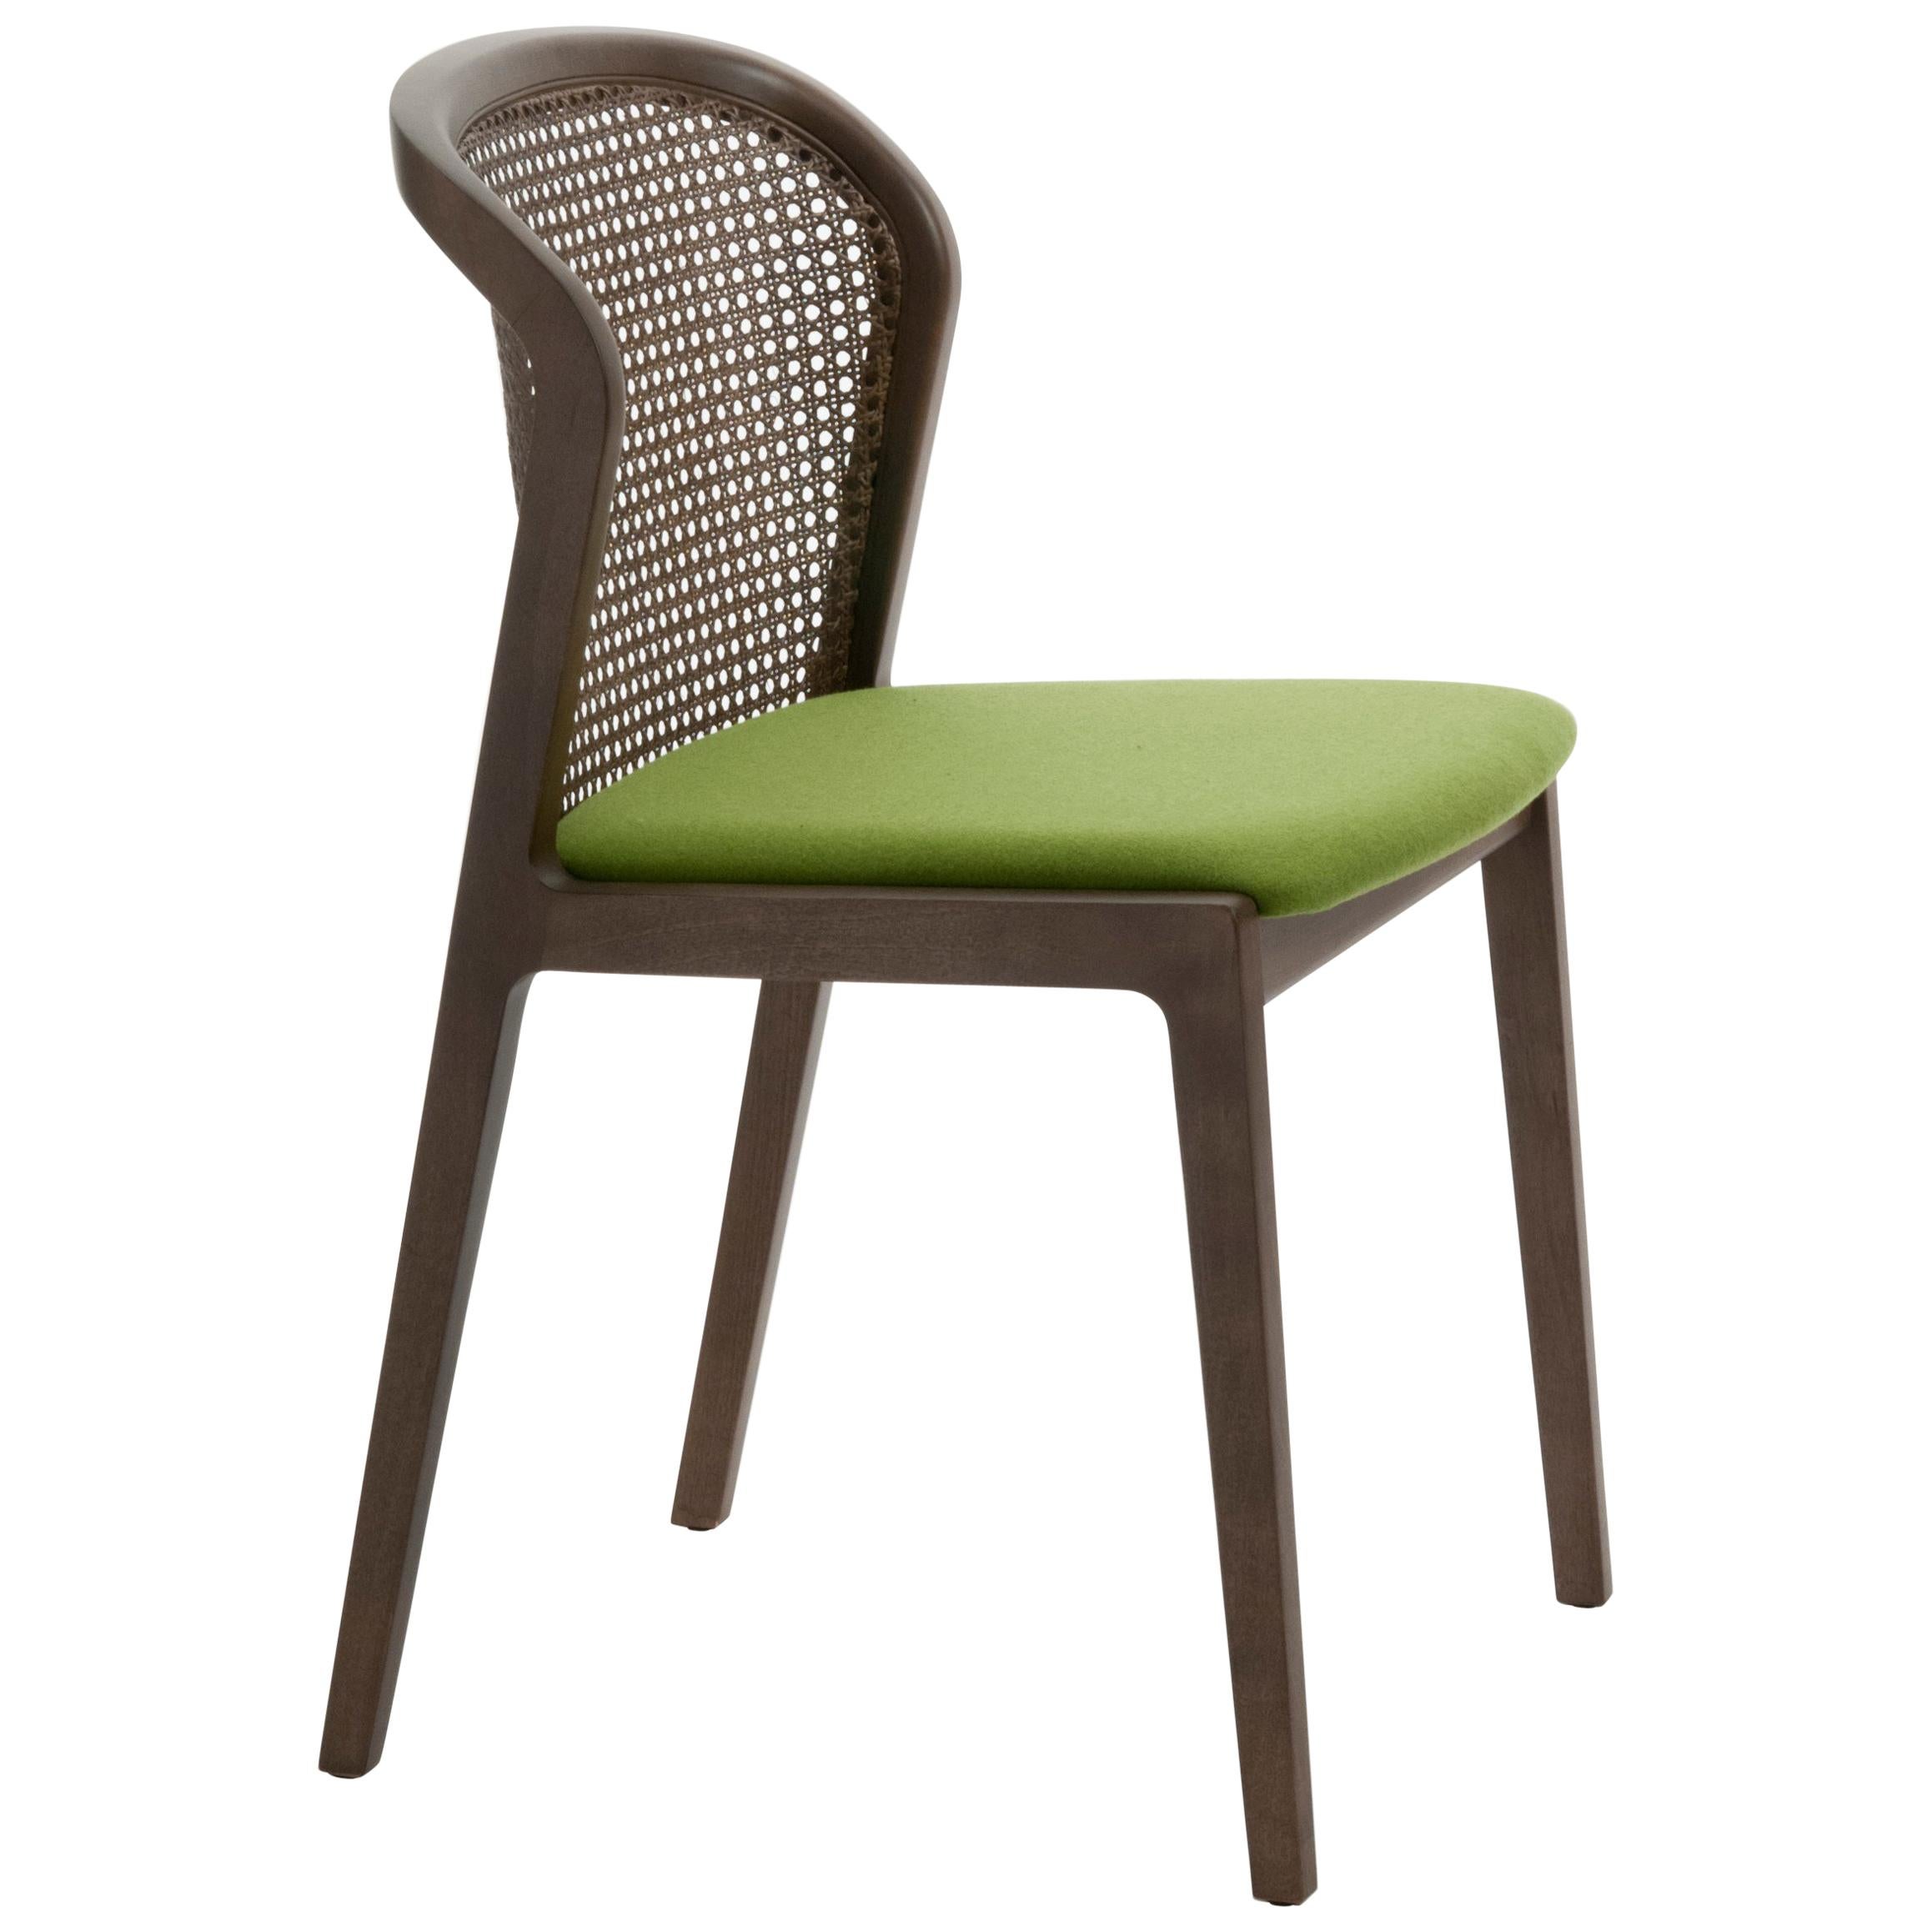 Vienna is an extraordinarily comfortable and elegant chair designed by Emmanuel Gallina who loves to quote Brancusi when saying that “simplicity is complexity resolved”. Inspired to the 1950s of Marcel Gascoin, but also to Vienna at the end of the